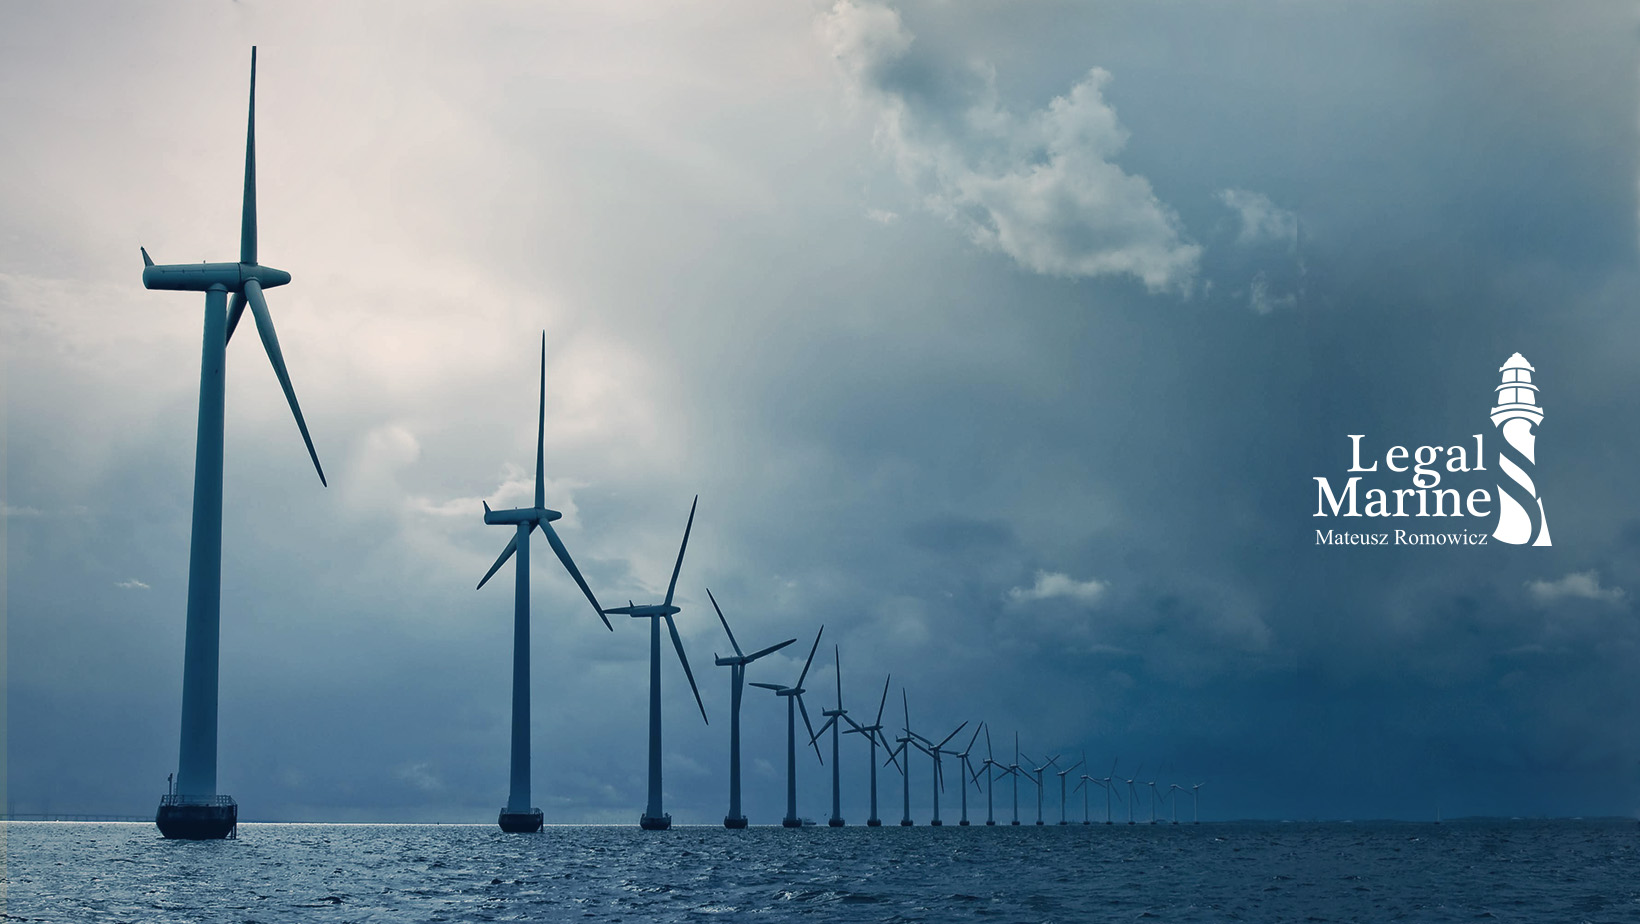 Offshore Wind Power in Poland is Illusion in the Coming Years – Interview with Mateusz Romowicz, Legal Adviser - MarinePoland.com